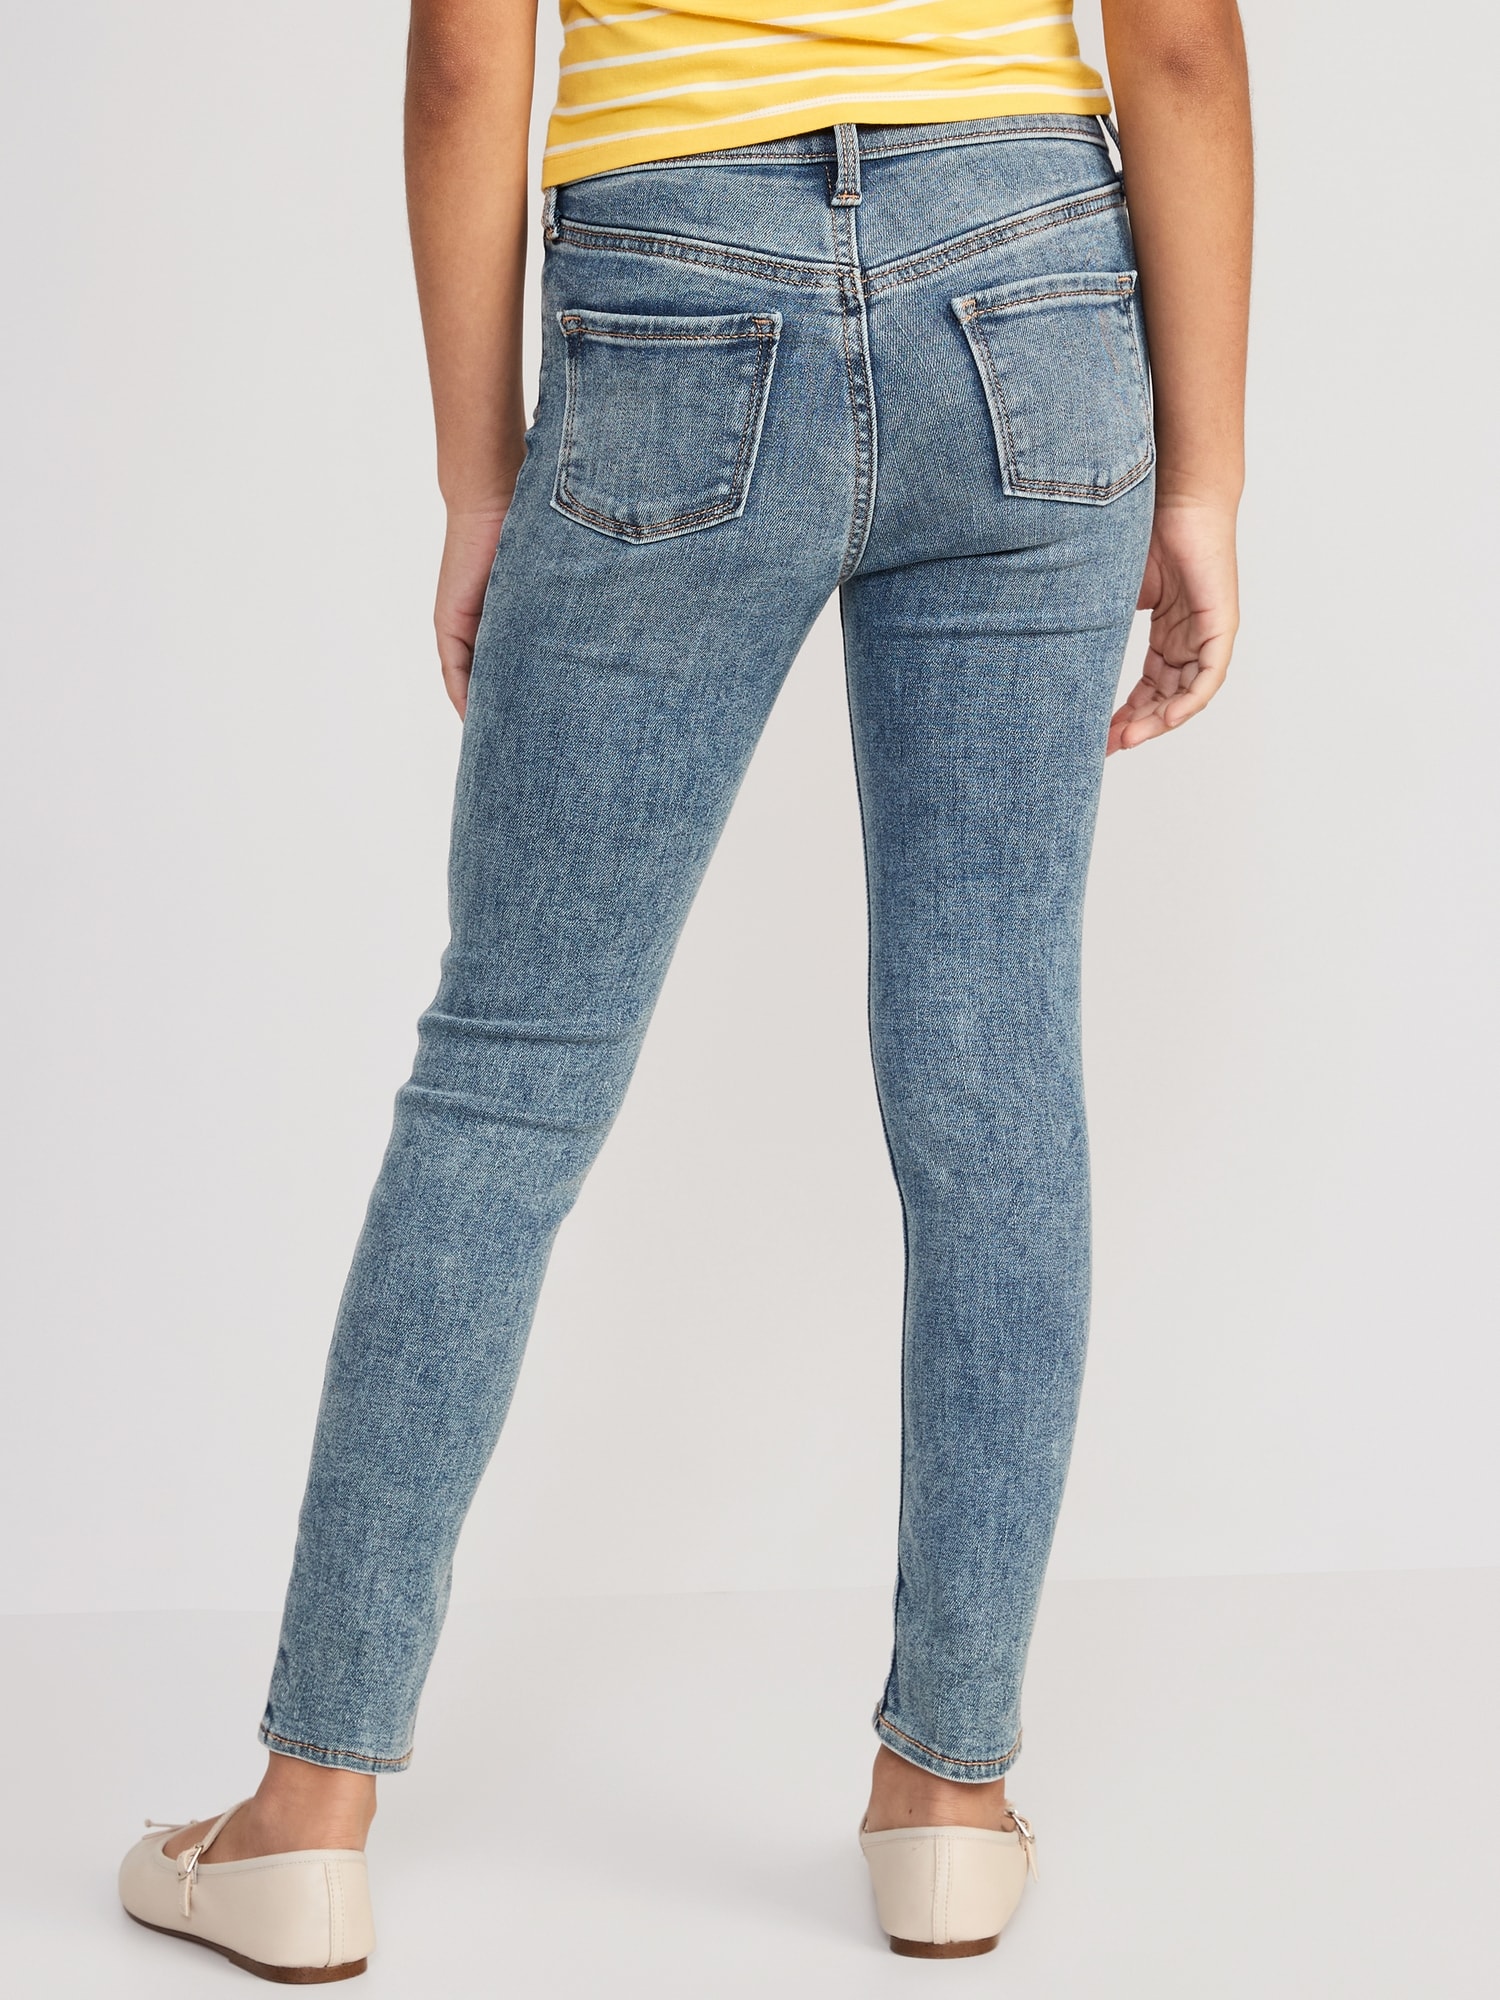 High-Waisted Rockstar 360° Stretch Ripped Jeggings for Girls | Old Navy